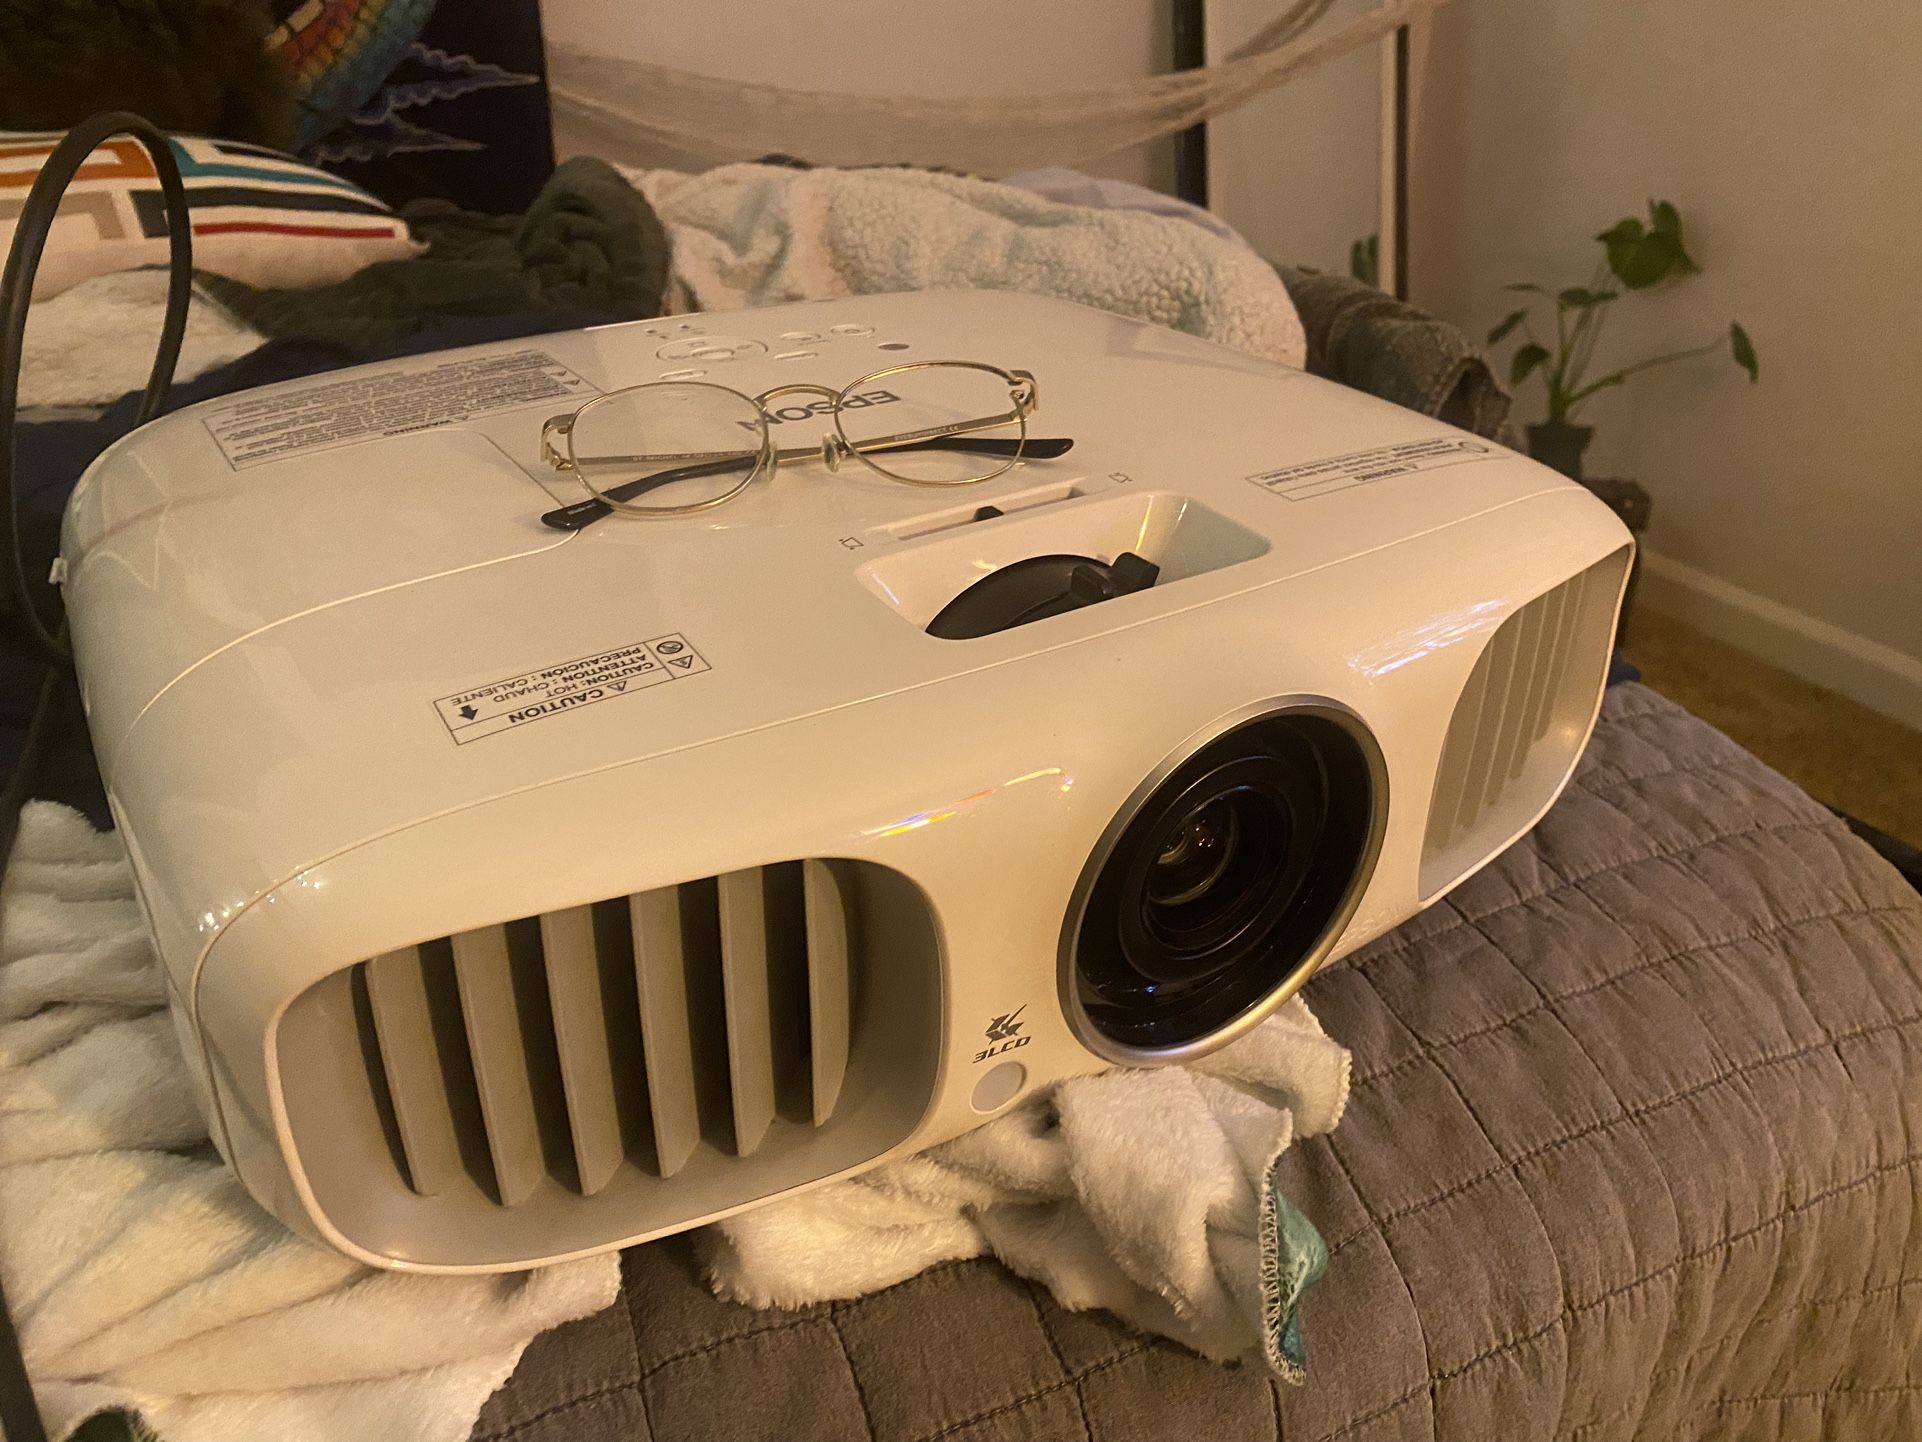 1080p 3D Epson (3010) Home Cinema Projector. Great Condition! 